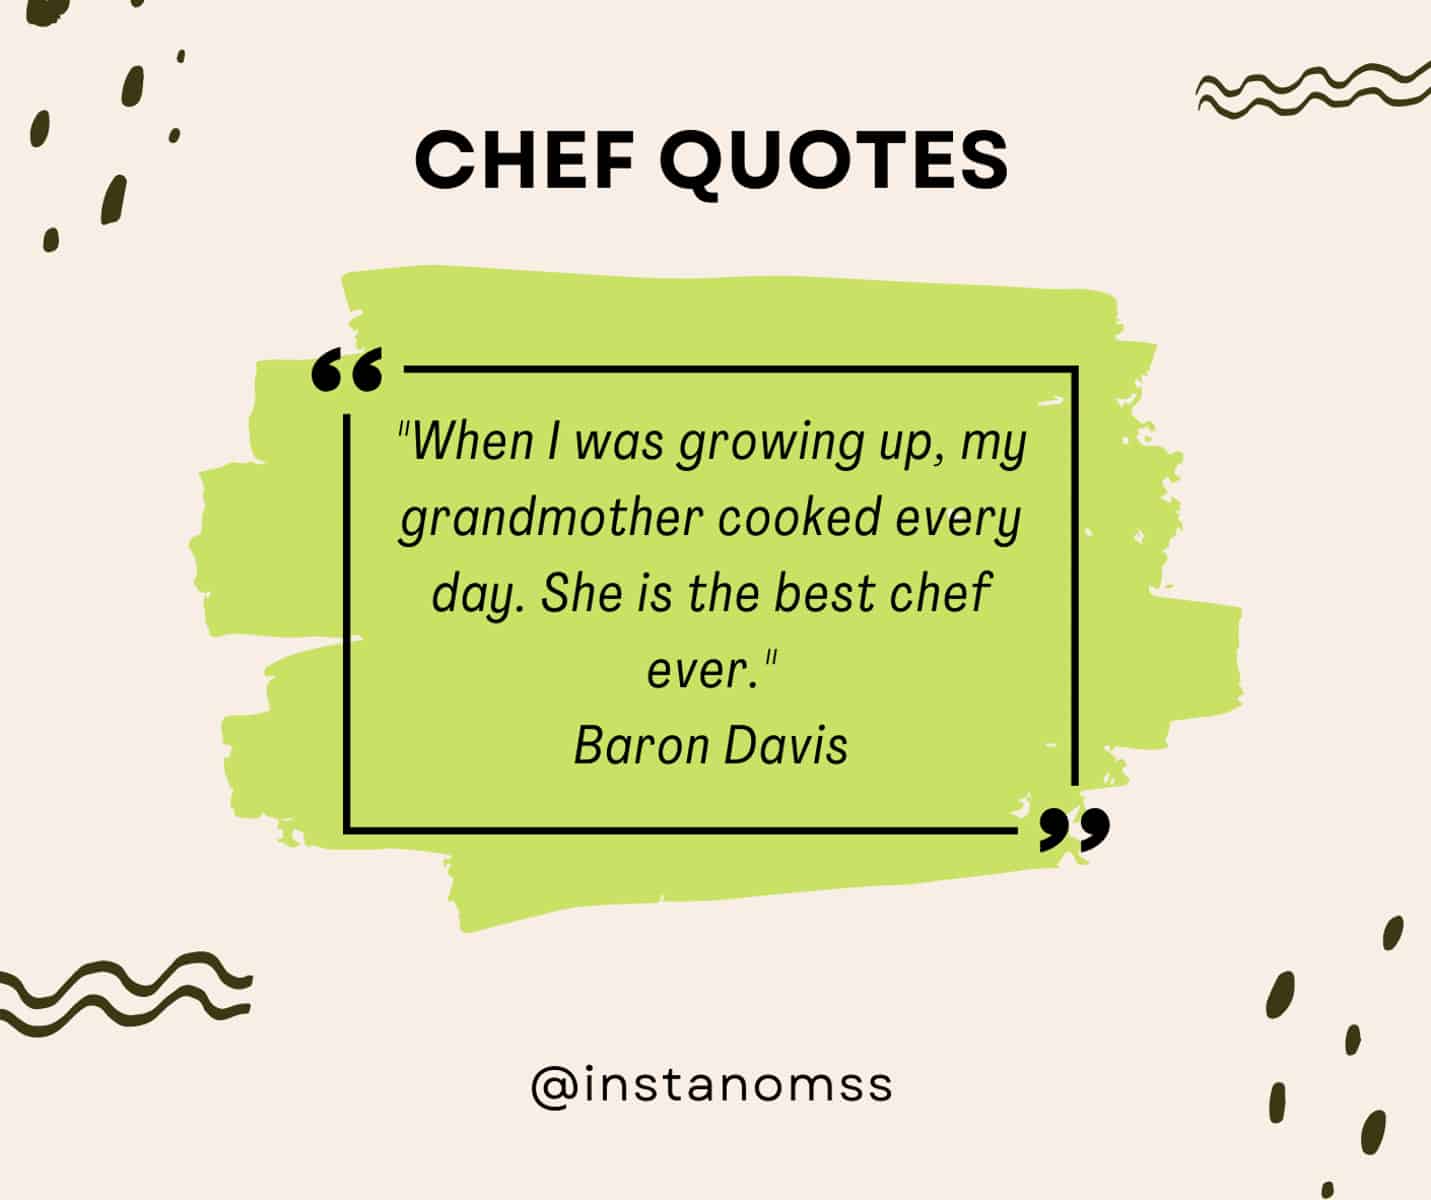 "When I was growing up, my grandmother cooked every day. She is the best chef ever." Baron Davis